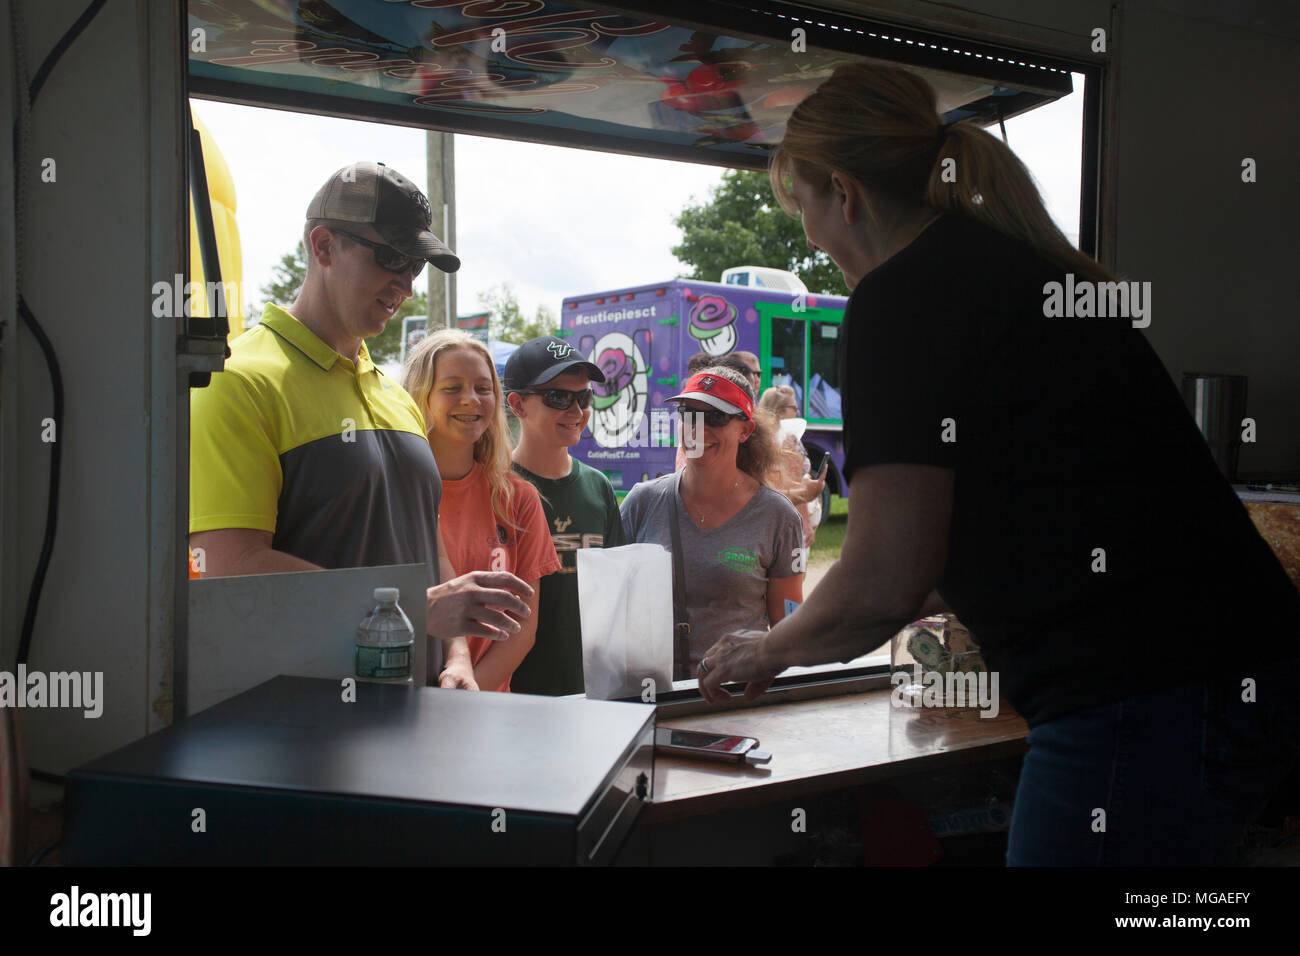 Satisfied customer buying a bag of donuts from a food truck vendor Stock Photo